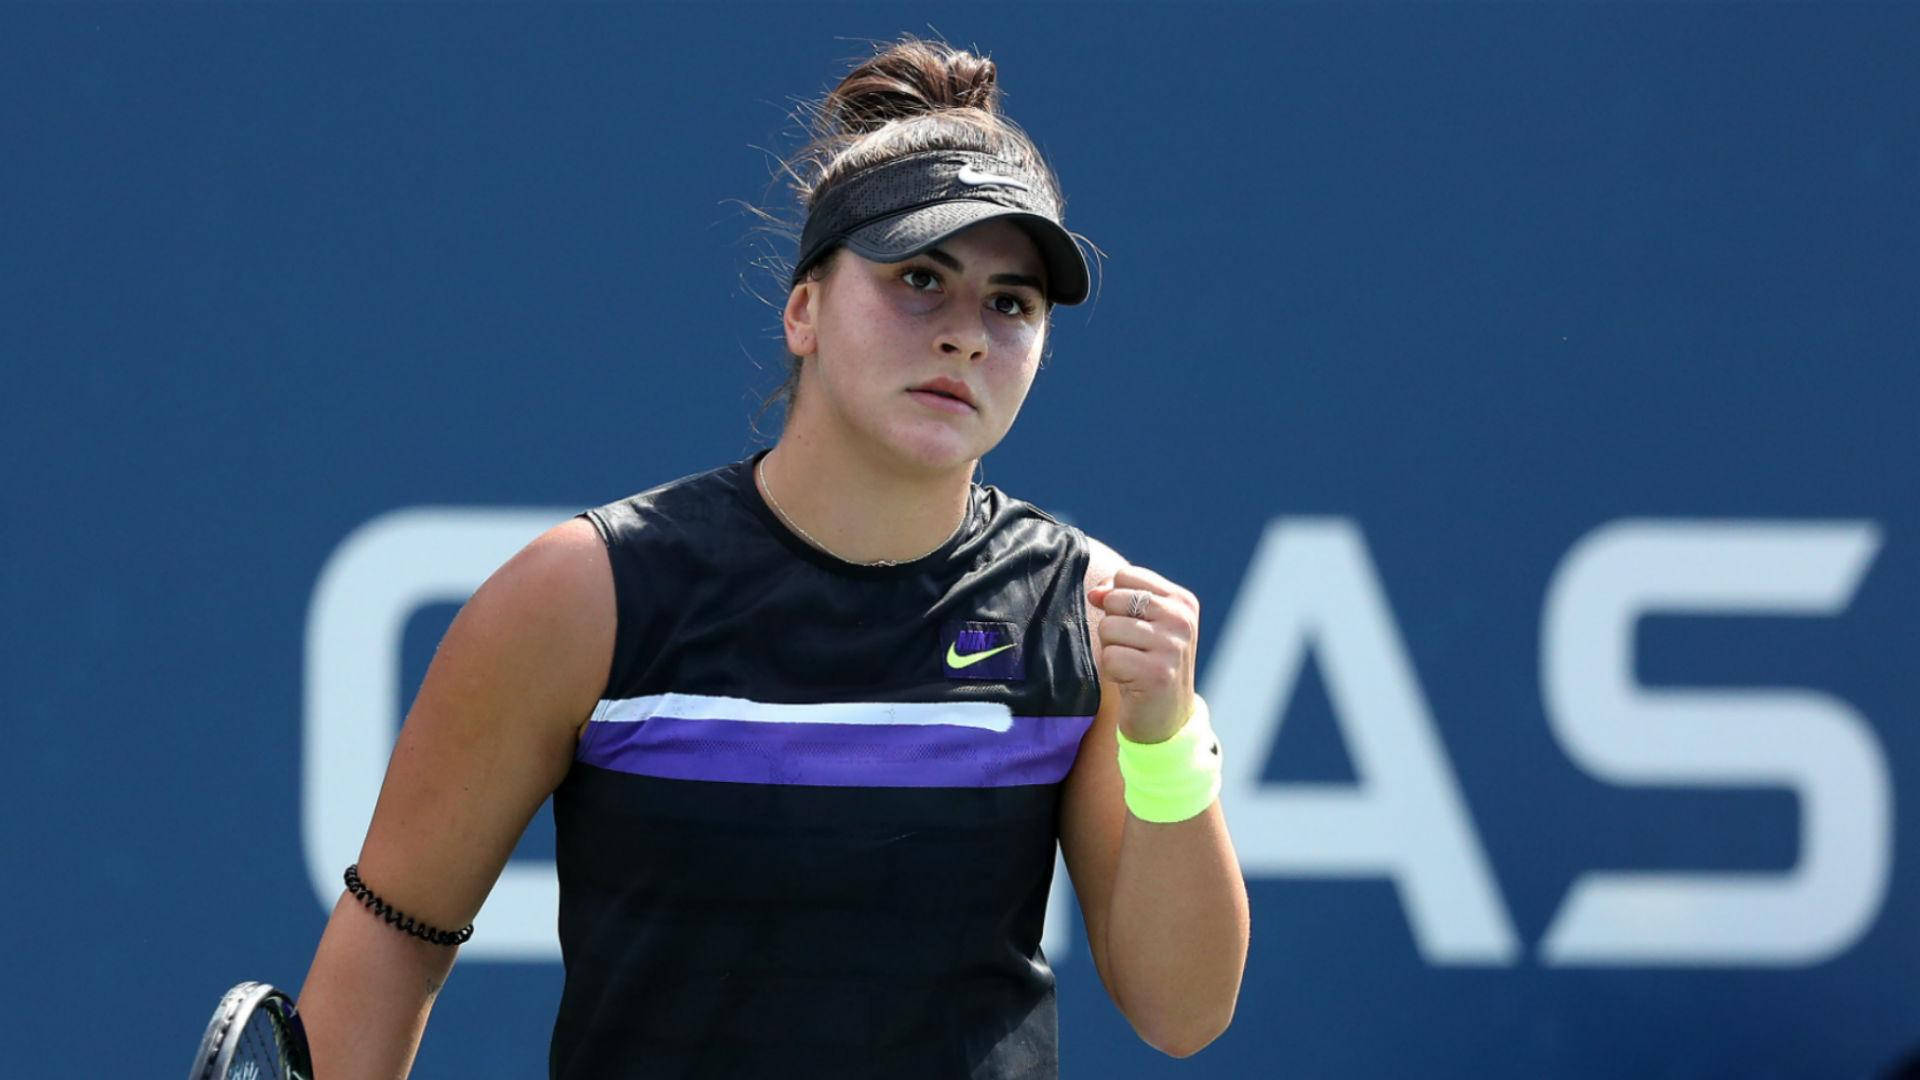 Canadian Tennis Prodigy Bianca Andreescu Showcasing a Focused Expression Wallpaper